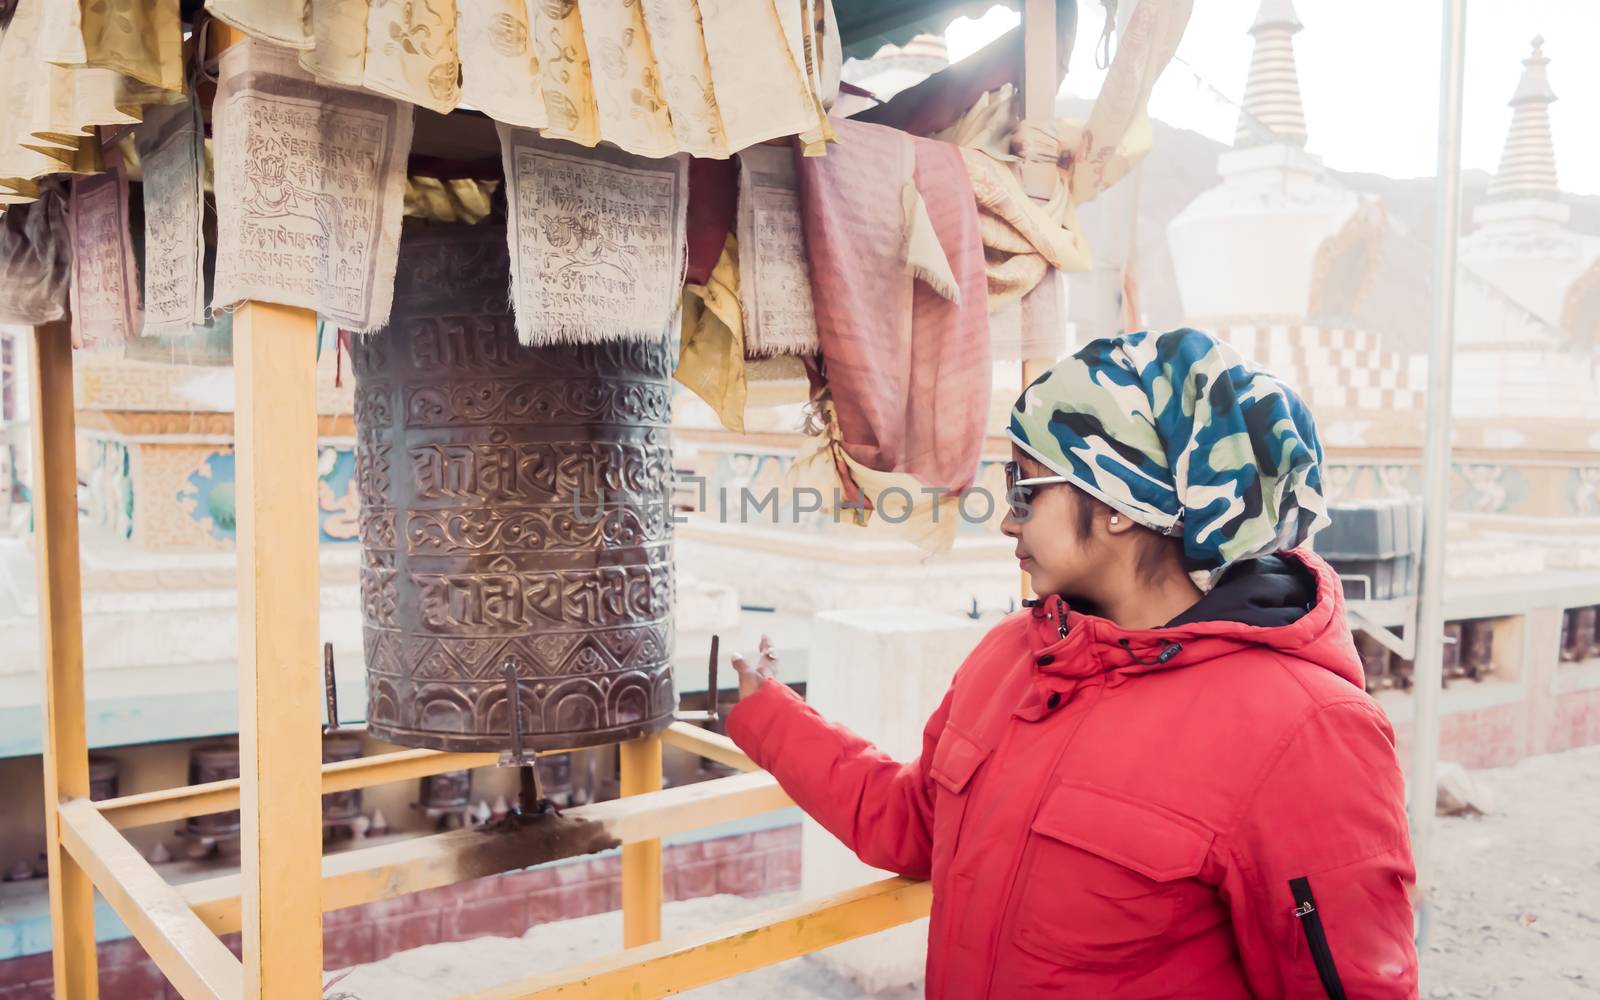 A solo traveler Indian woman in warm clothing turning Buddhist prayer wheel drum of a Buddhist monastery. Travel Holiday vacation background. Kaza, Himachal Pradesh, India, South Asia May 2019